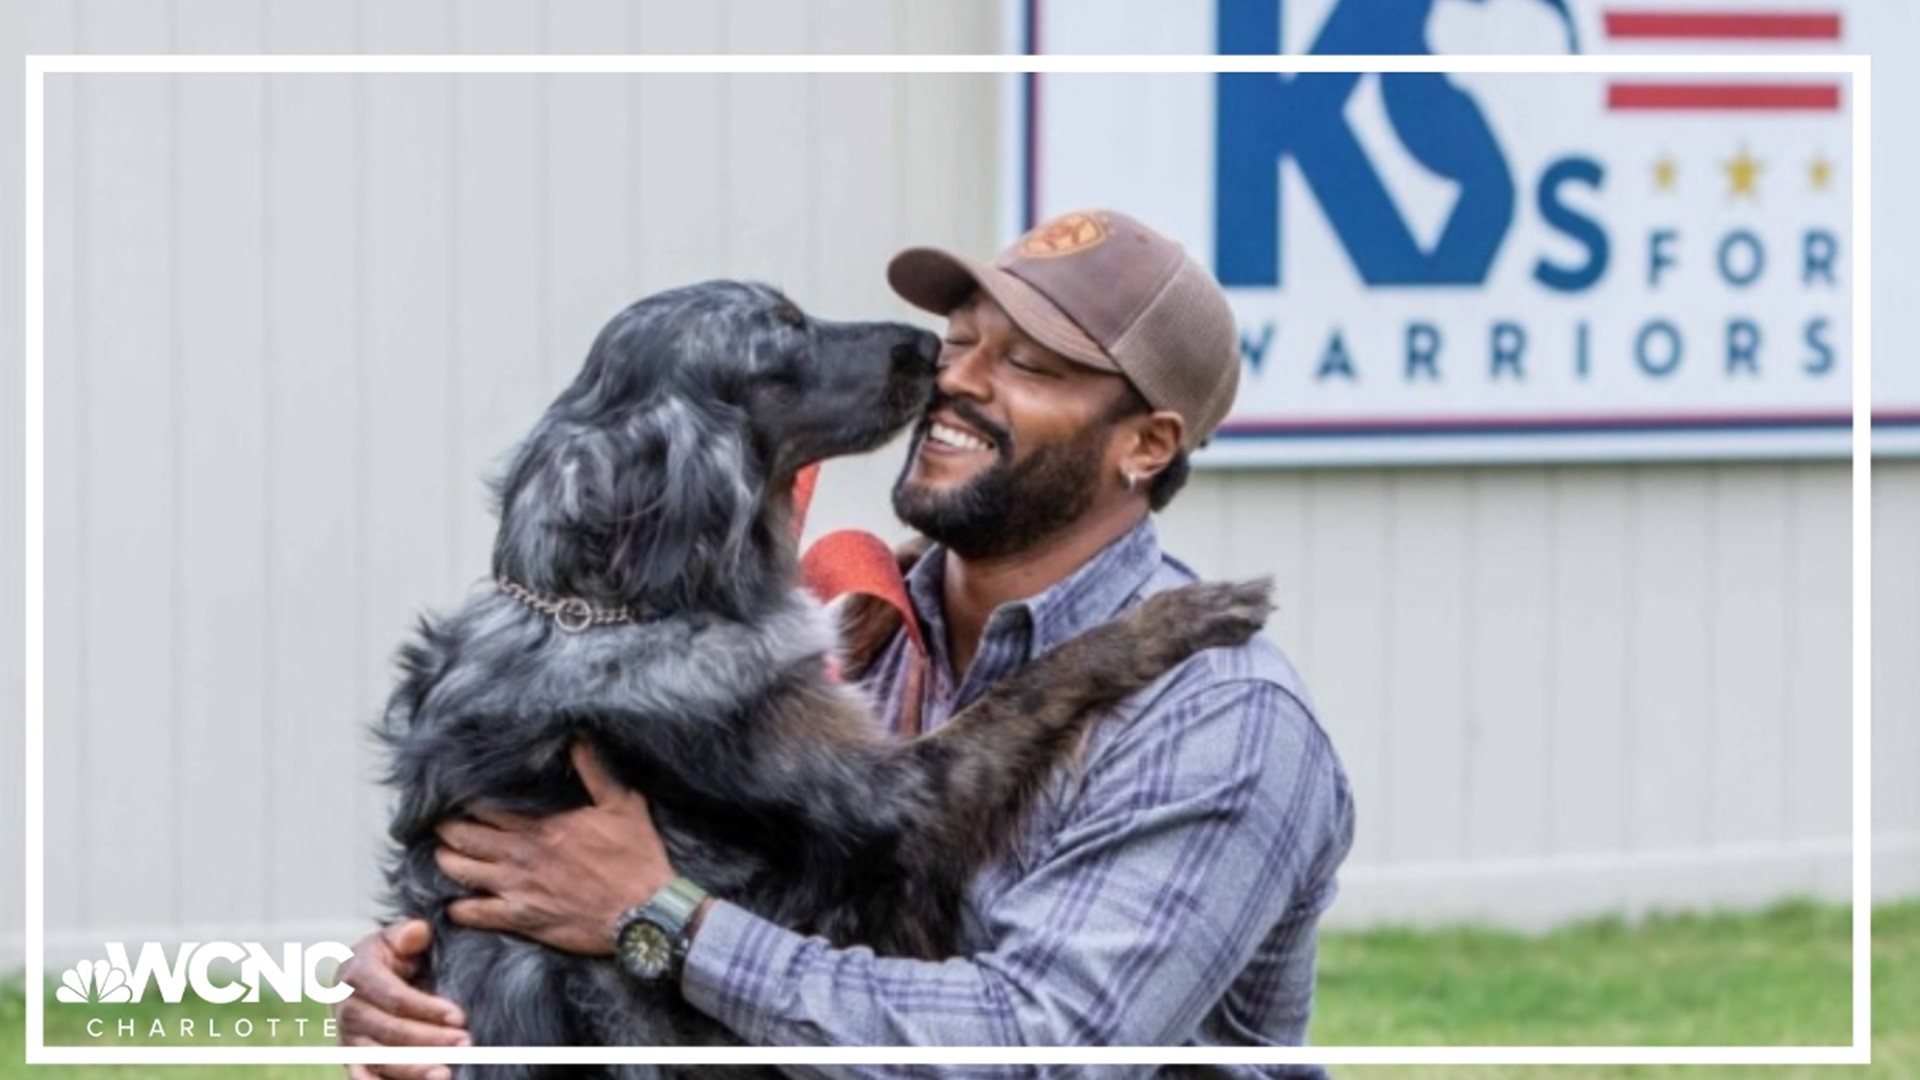 The organization pairs military veterans struggling with PTSD along with other physical and emotional trauma with trained service dogs.